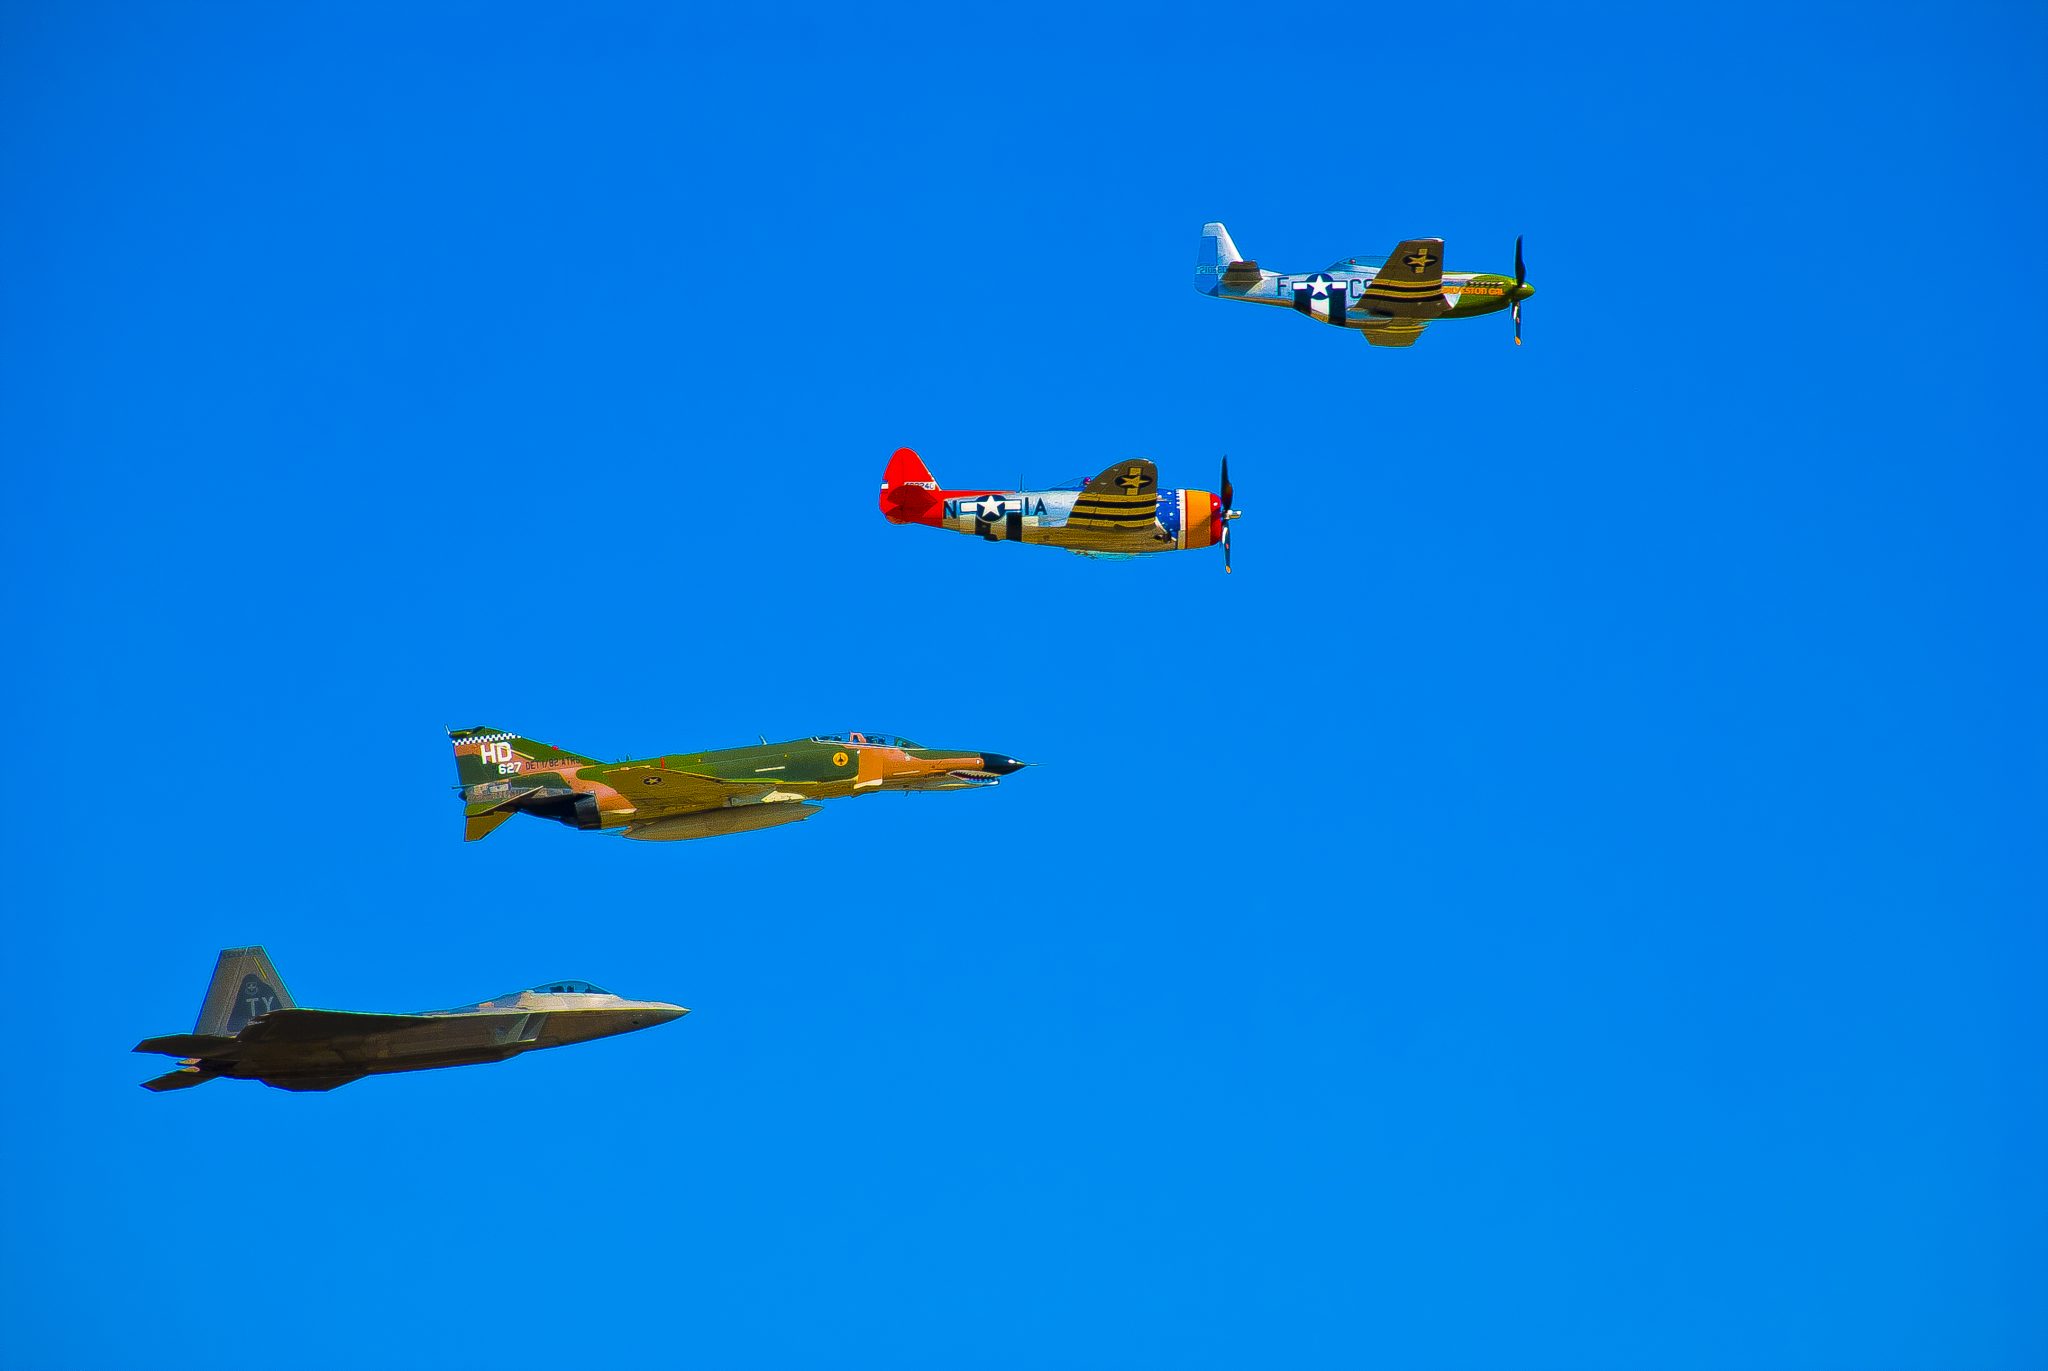 An Example of a Heritage Flight including the P-51 Mustang, P-47 Thunderbolt, the QF-4 Phatom and the F-22 Raptor (Photo: Landmark9254)